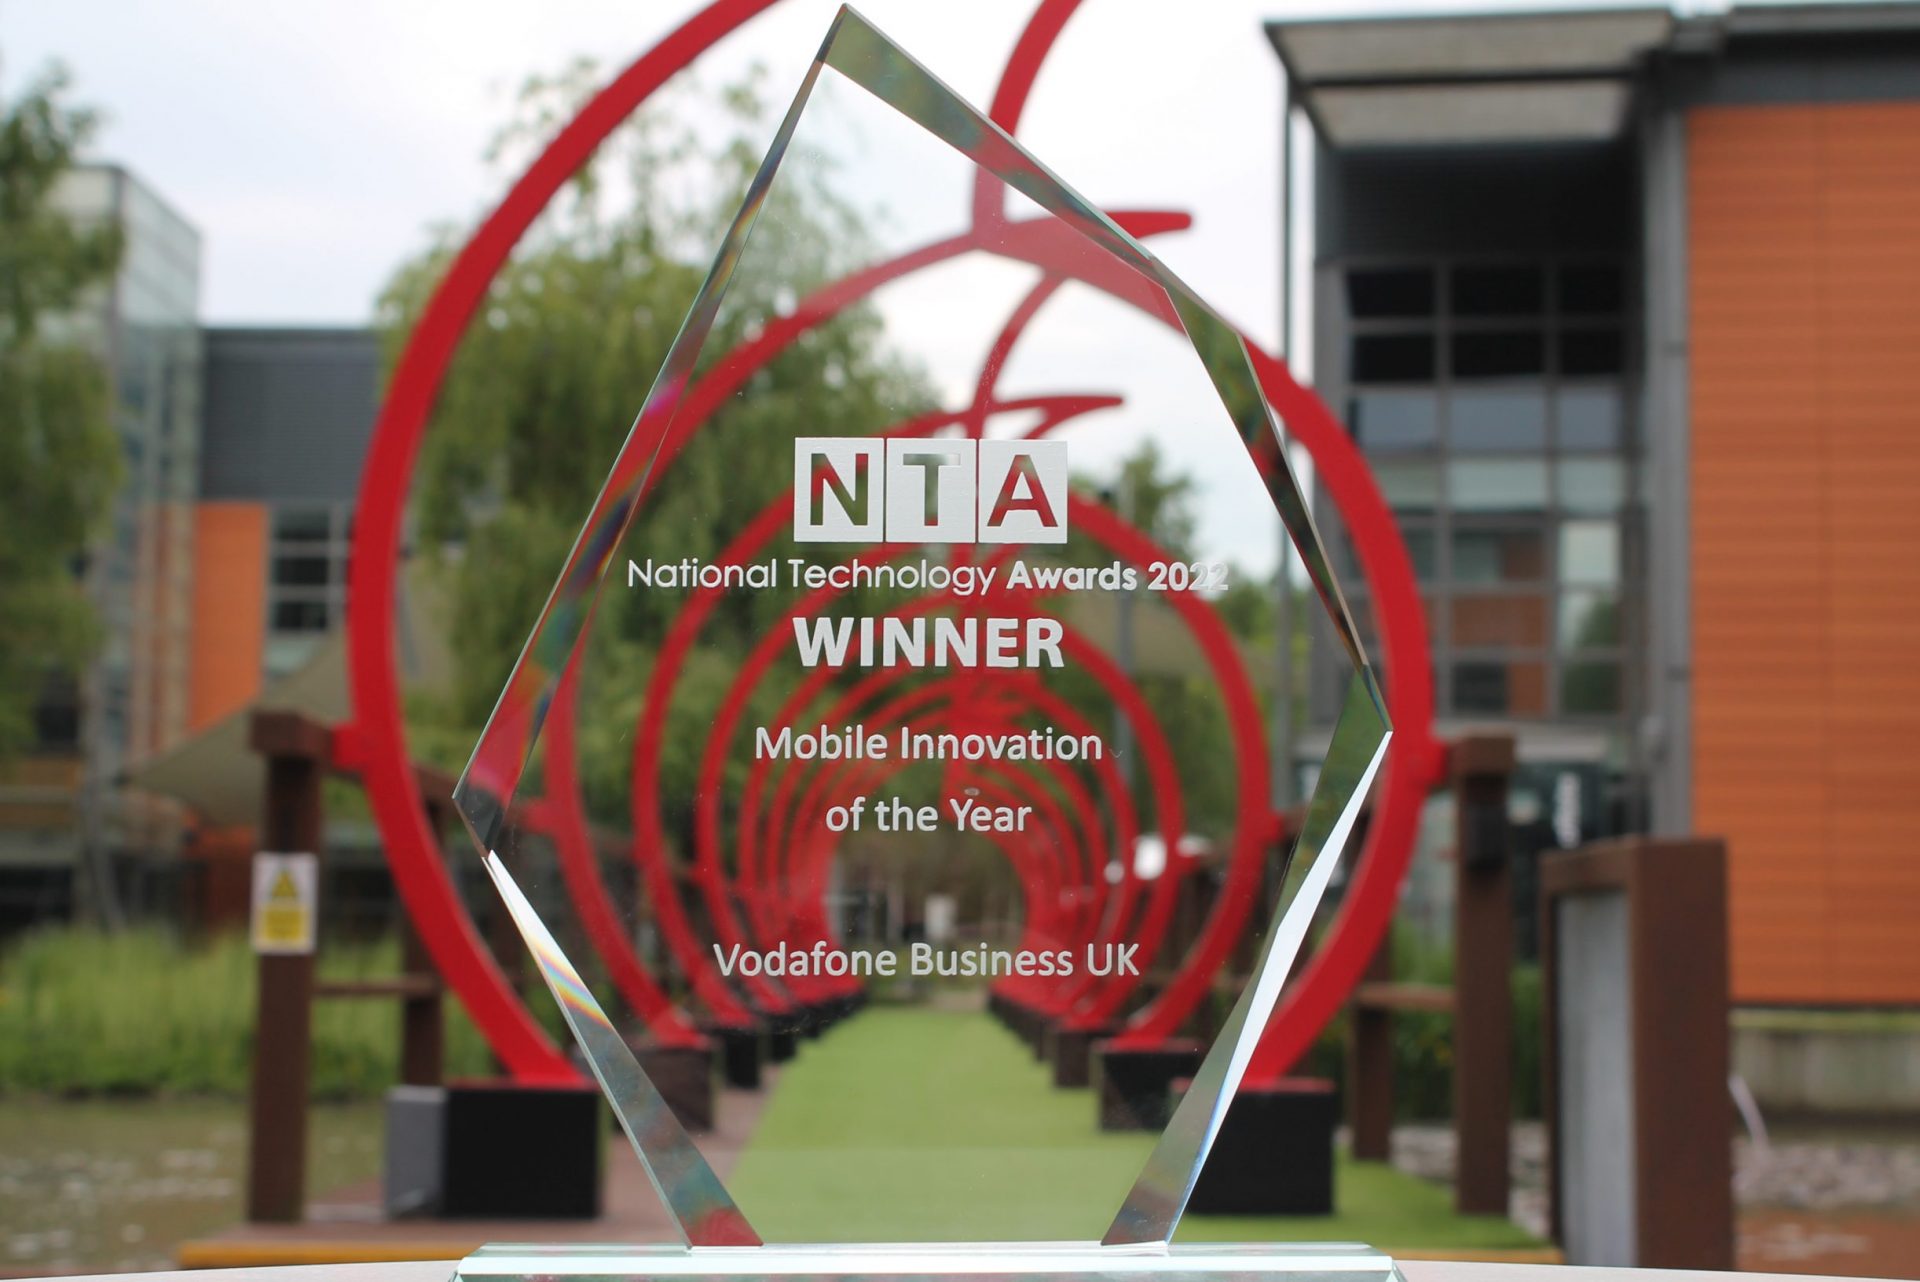 Vodafone Business UK's National Technology Awards 'Mobile Innovation of the Year' trophy at Vodafonne's Newbury Campus